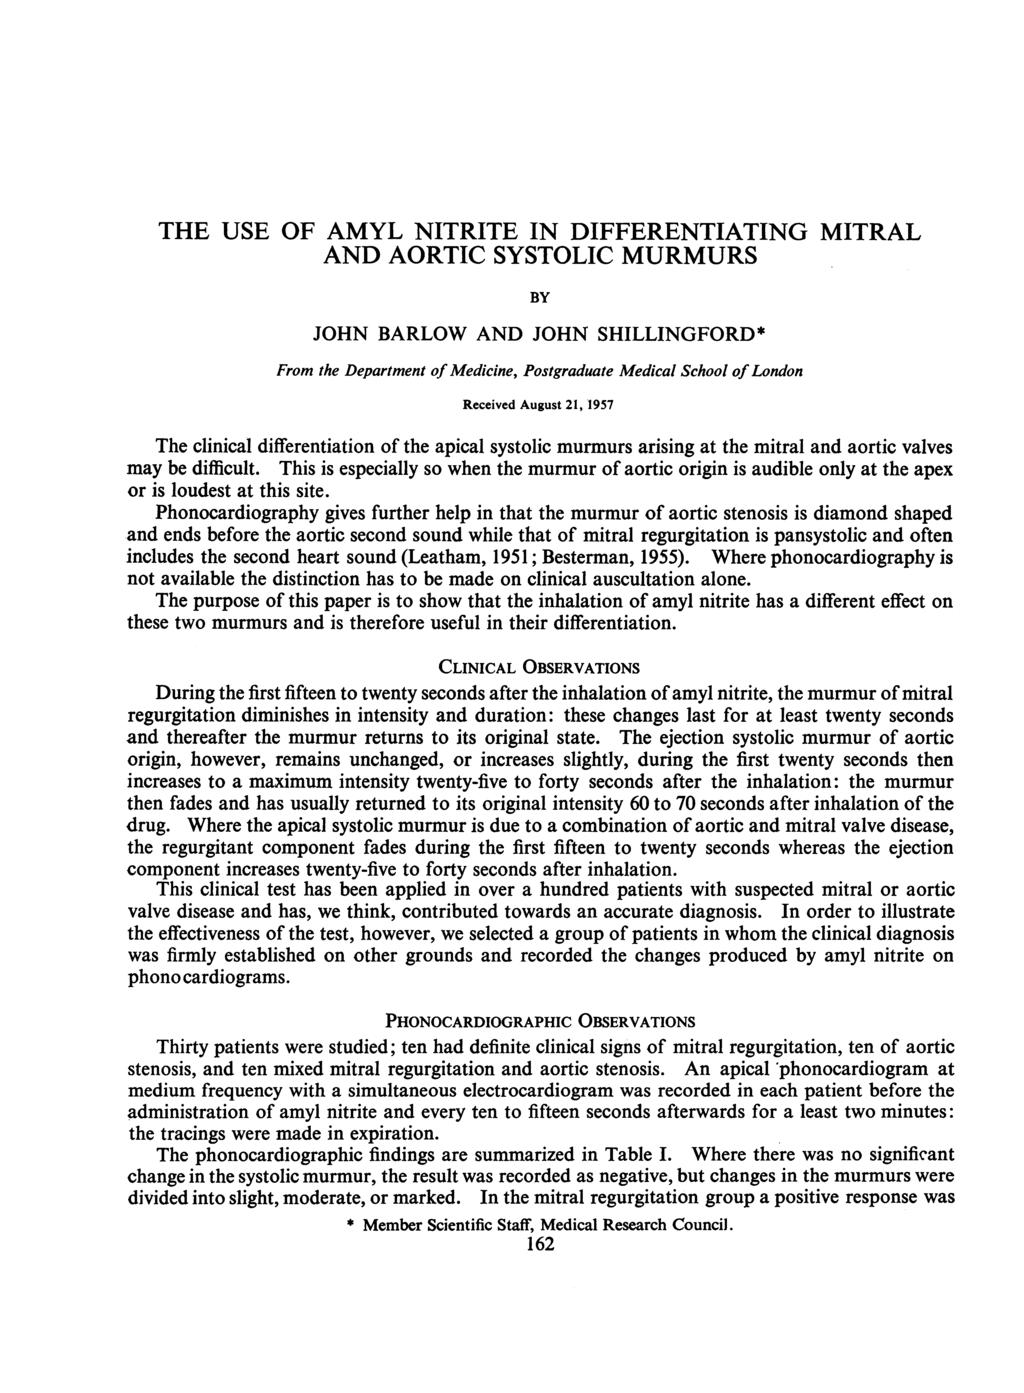 THE USE OF AMYL NITRITE IN DIFFERENTIATING MITRAL AND AORTIC SYSTOLIC MURMURS BY JOHN BARLOW AND JOHN SHILLINGFORD* From the Department of Medicine, Postgraduate Medical School of London Received